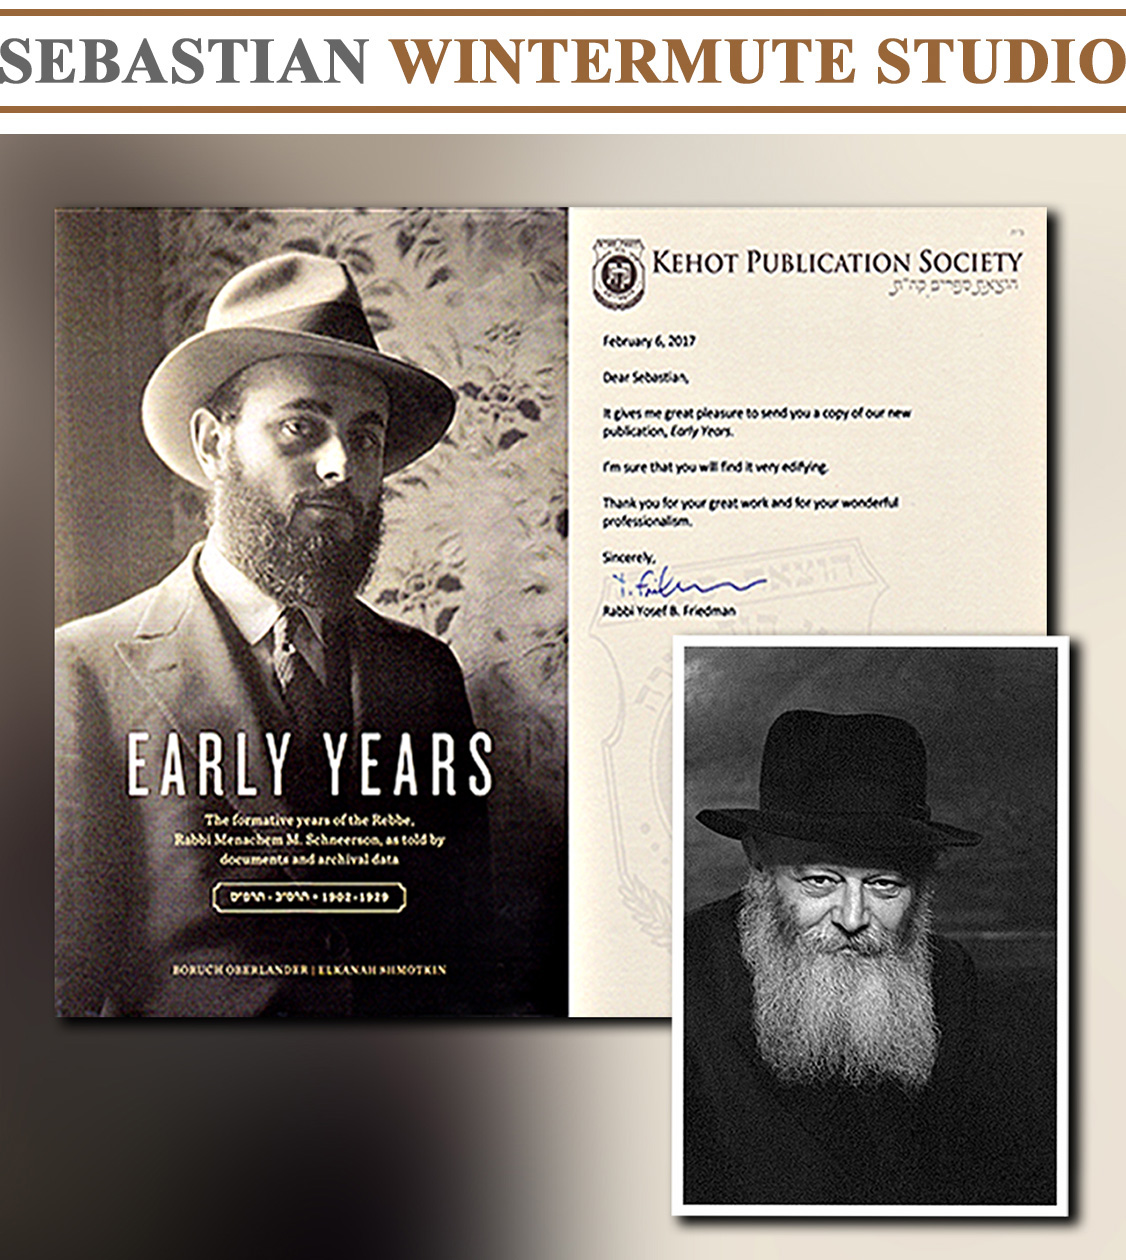 A number of rarely seen photographs were digitized and retouched in preparation for the publication of a book about Rebbe Menachem Mendel Schneerson.